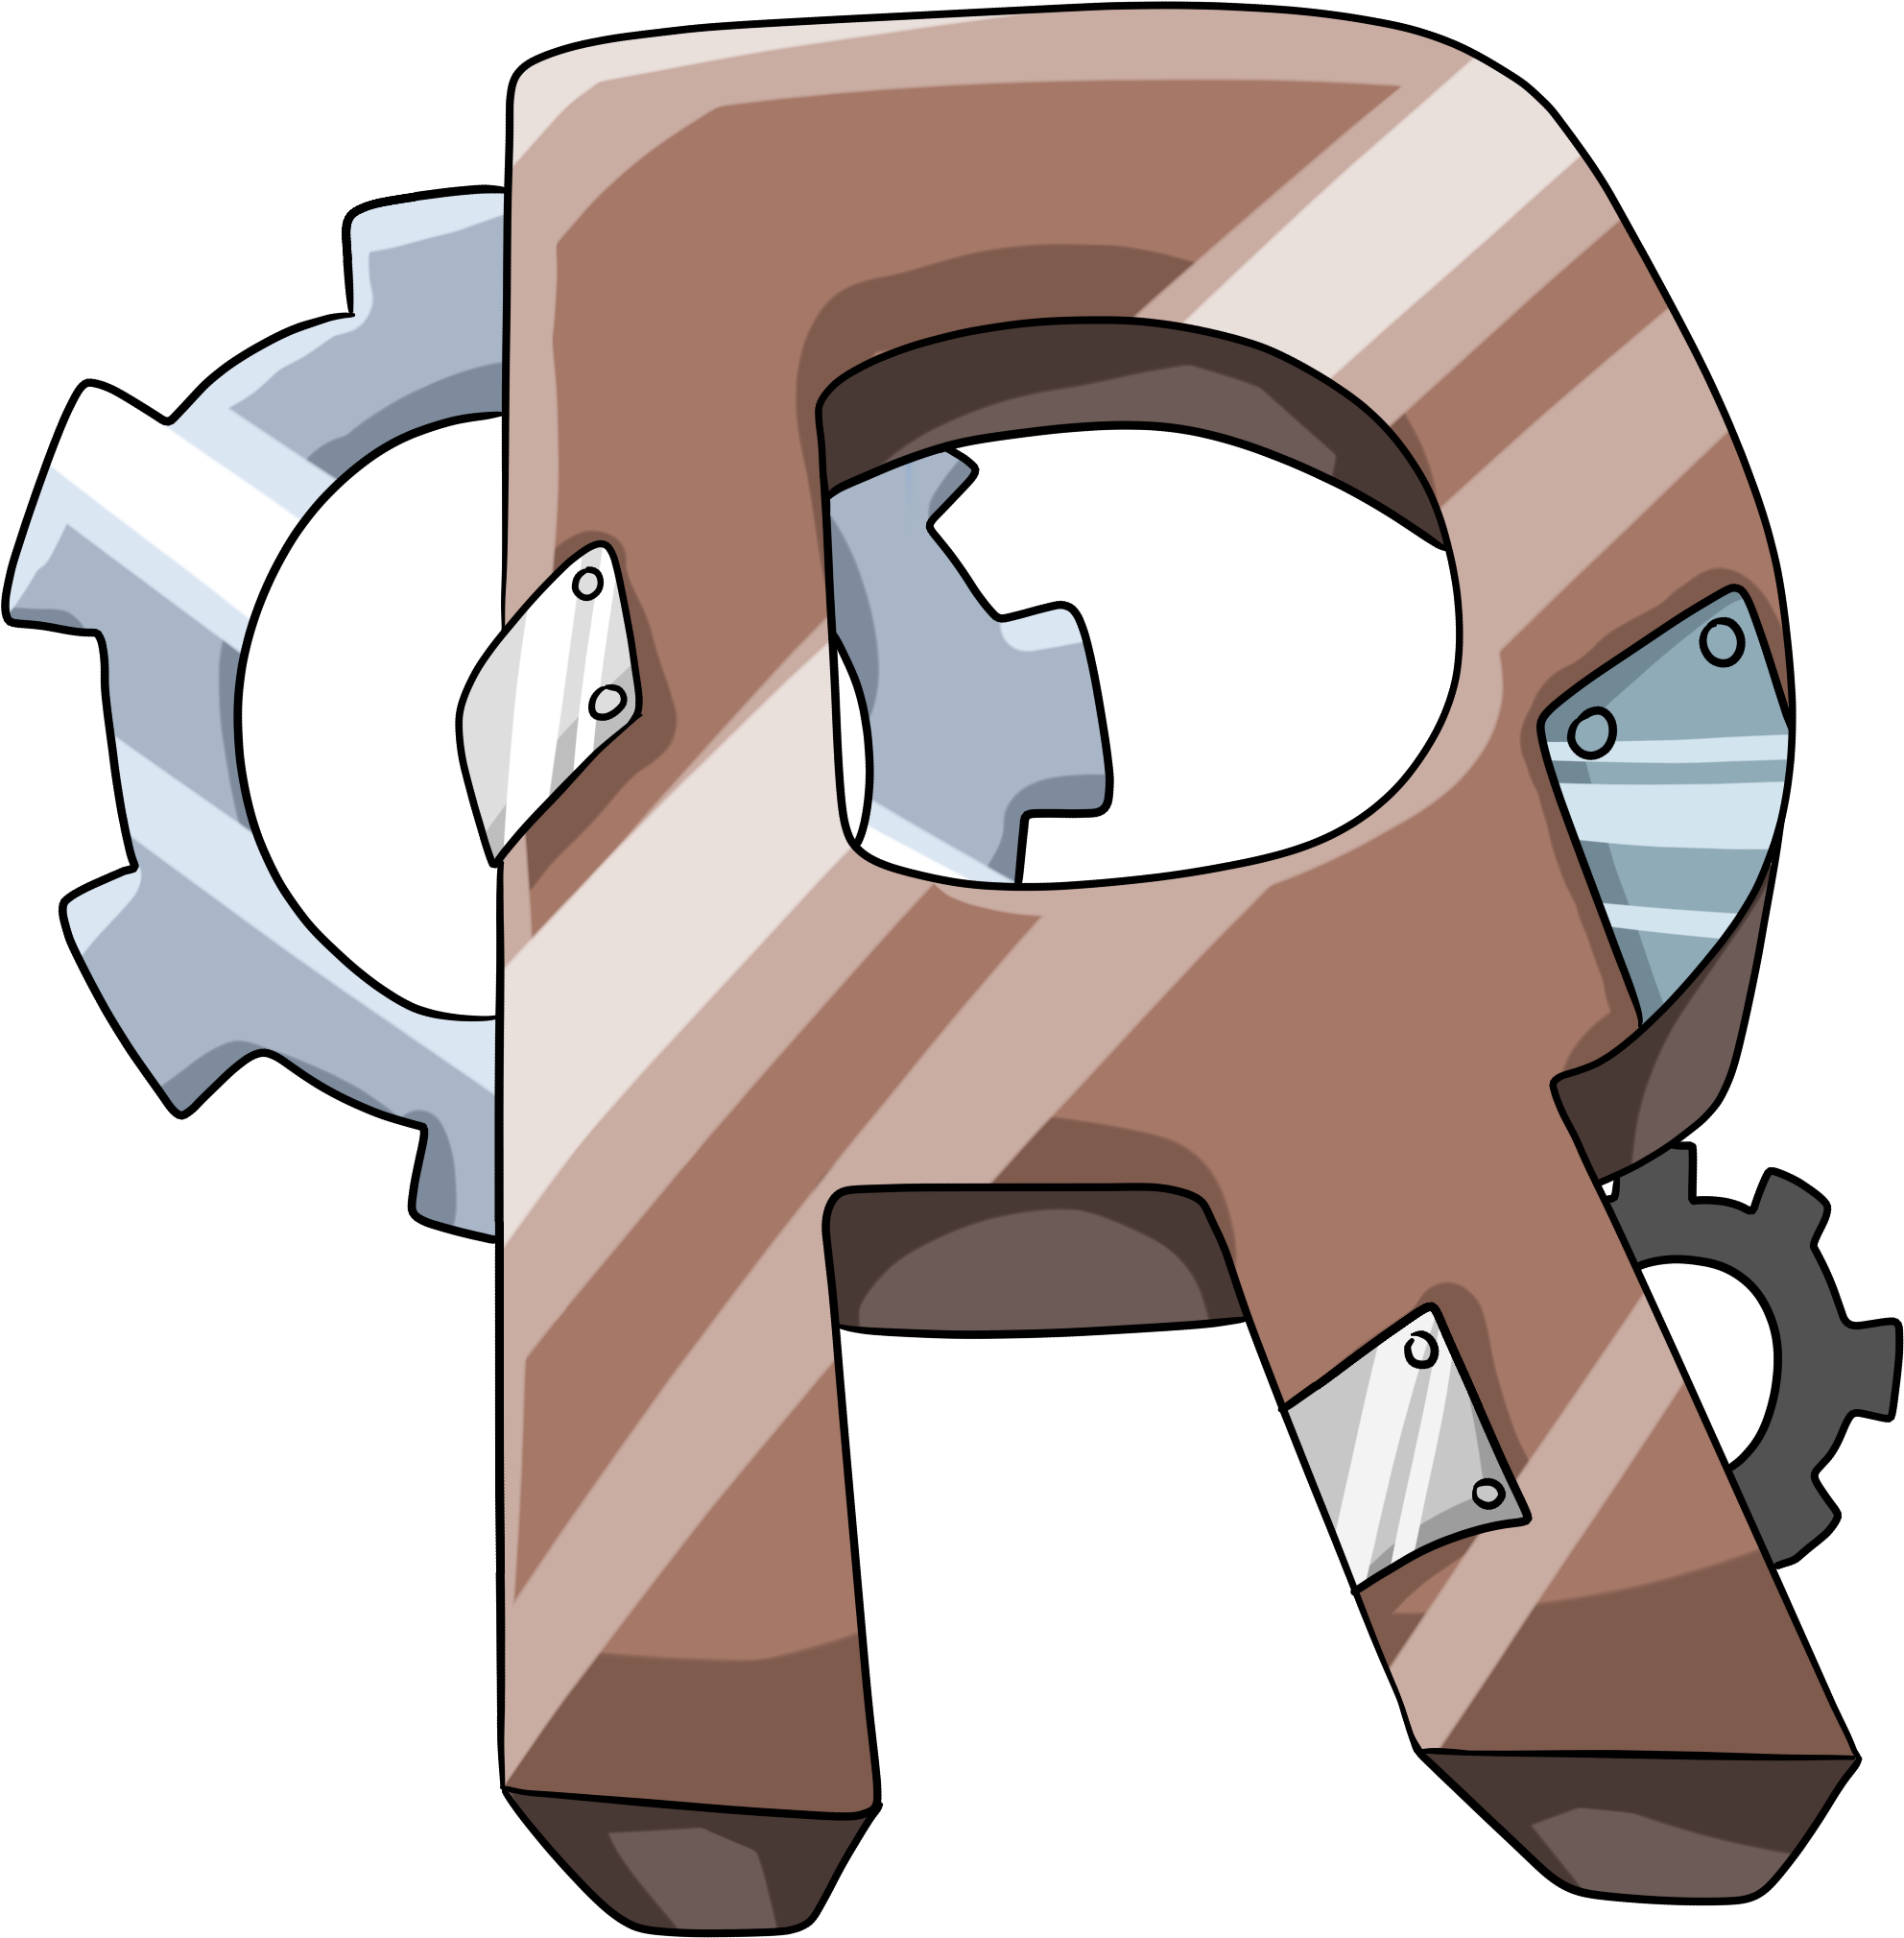 Img - Minecraft Server Icon Clipart - Large Size Png Image - PikPng.